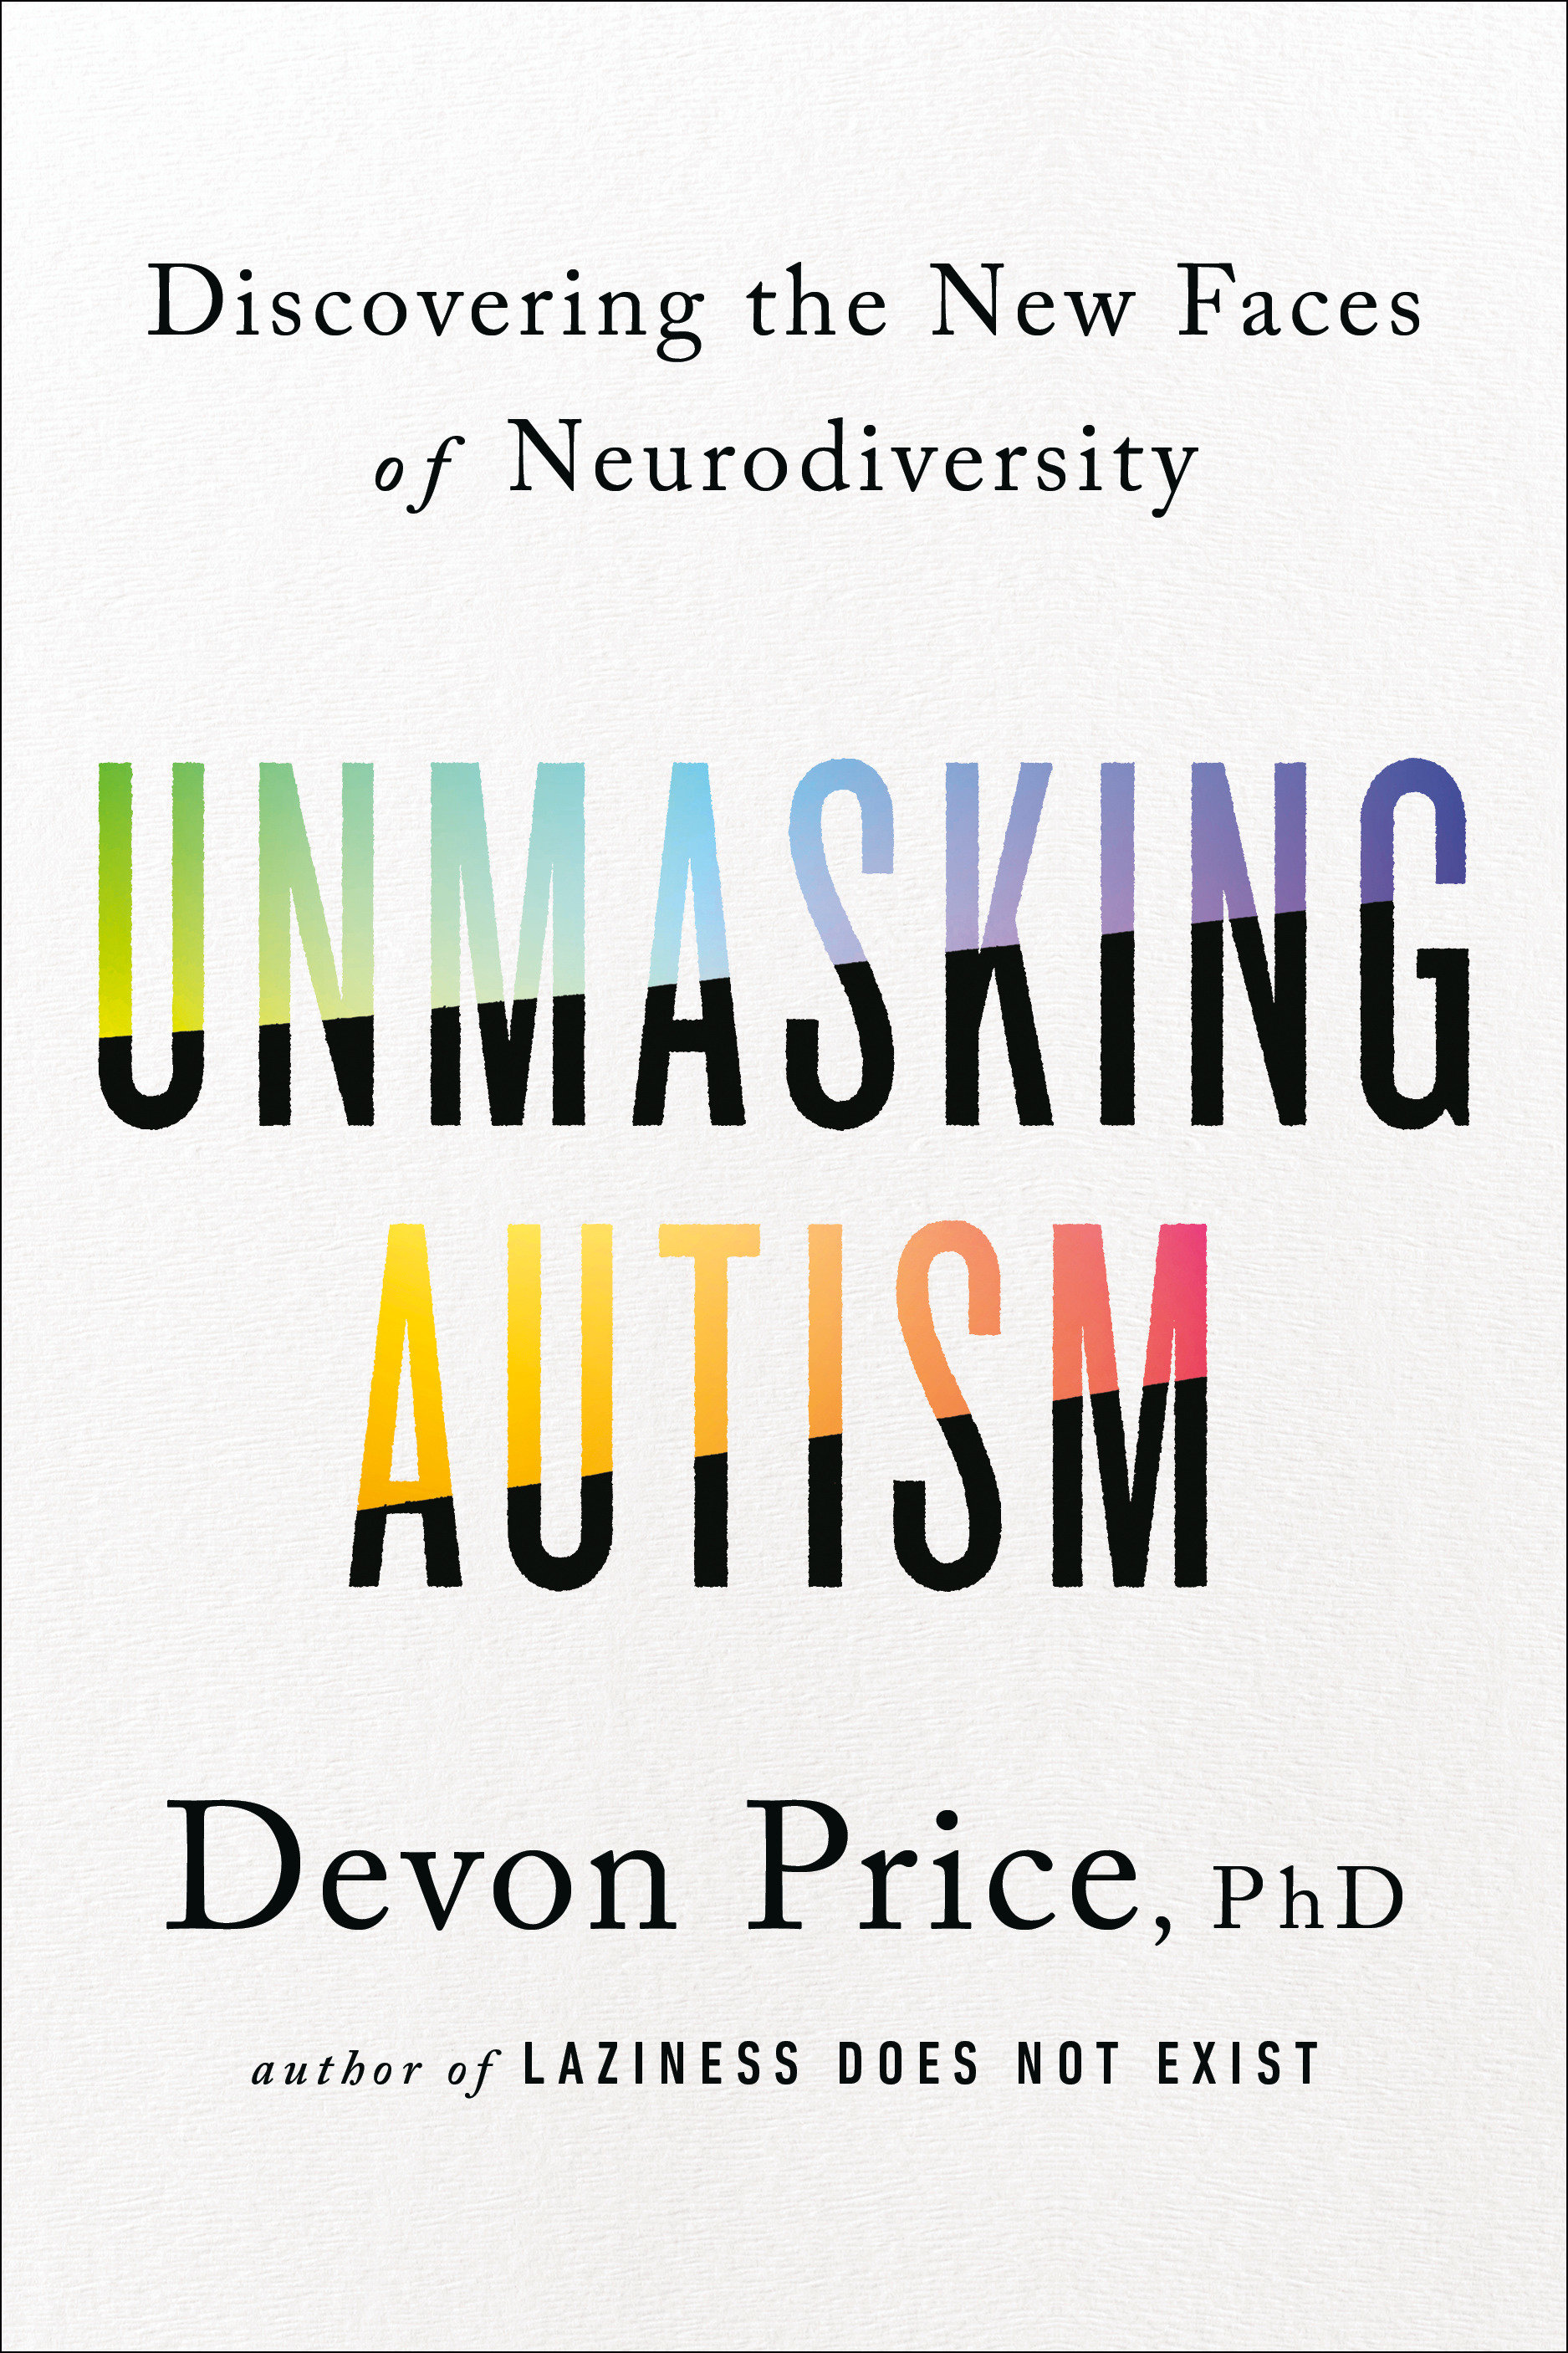 Cover Image of Unmasking Autism